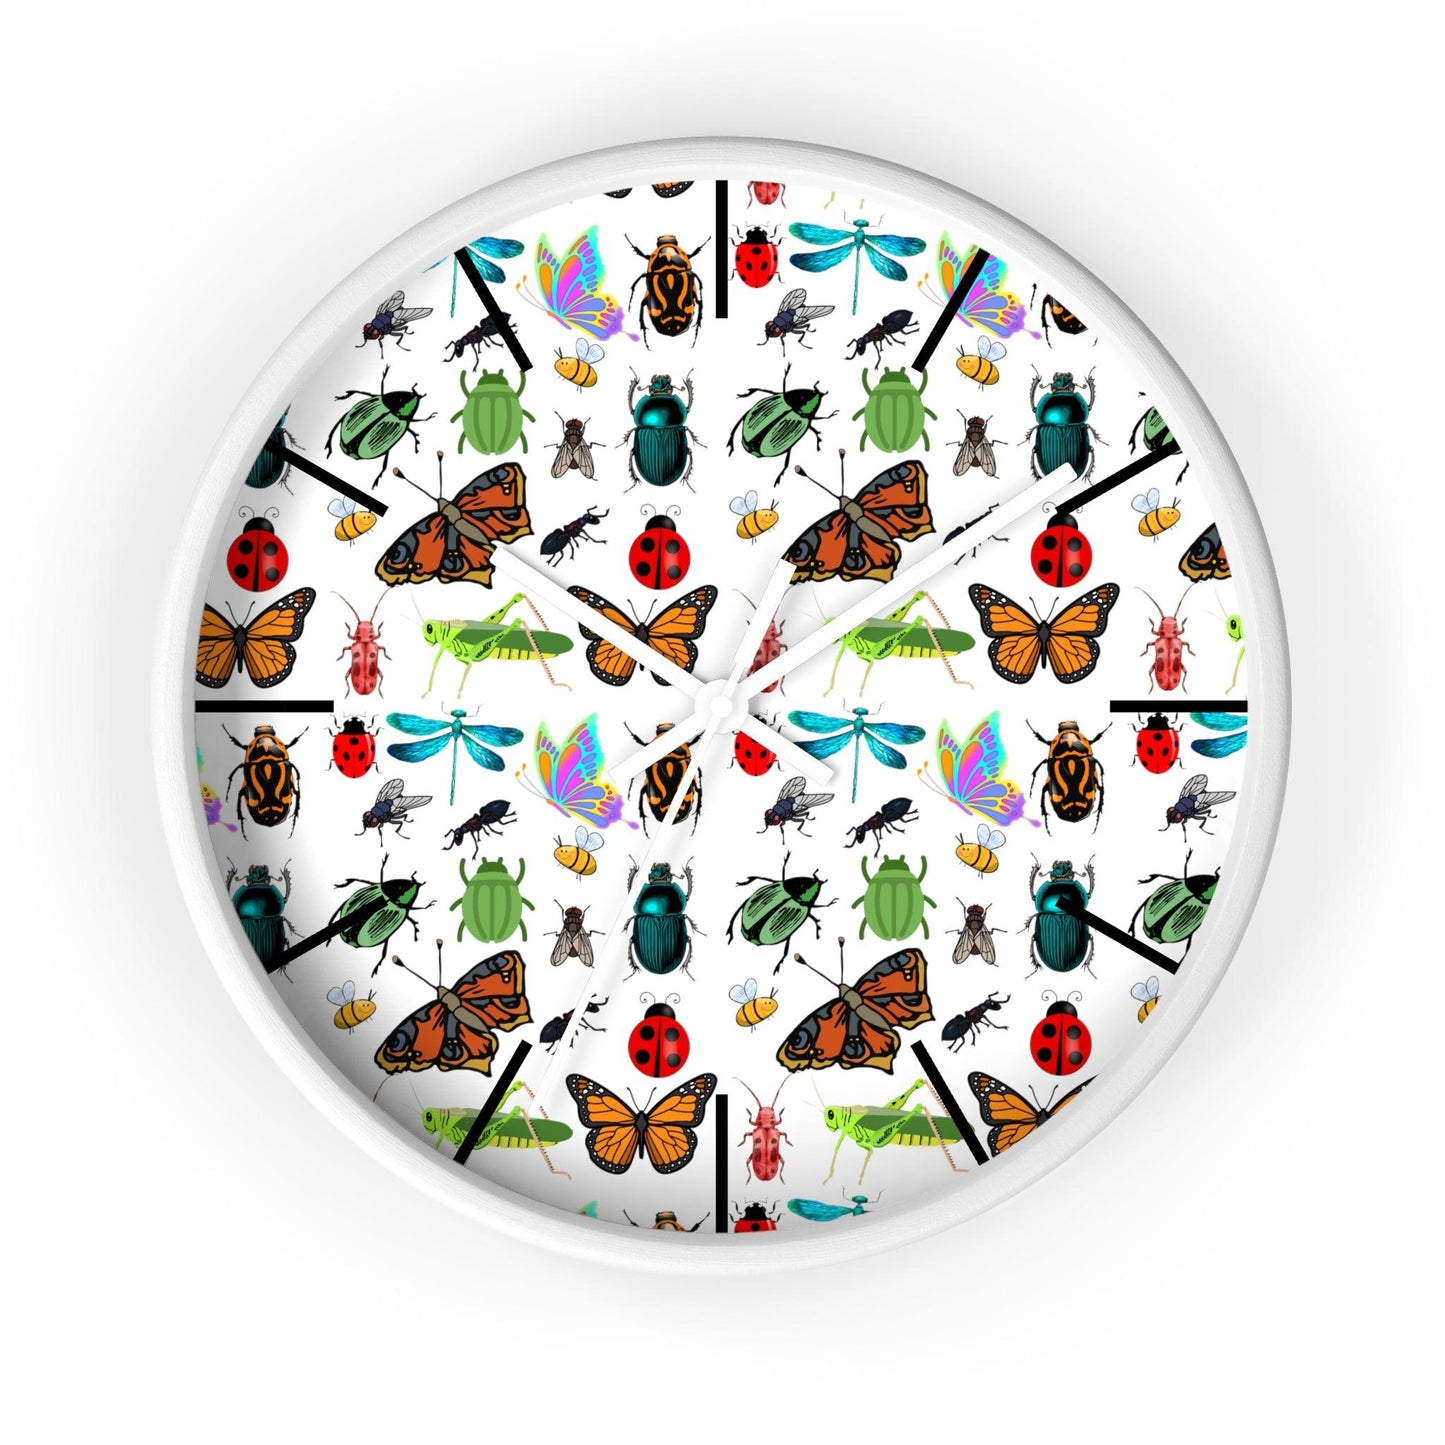 Bug Wall Clock Wall Clock Insects Wall Clock Home Decor Gift House Warming Gift - Unique Gift Farmhouse Clocks For Wall Living Room Bedroom - Giftsmojo